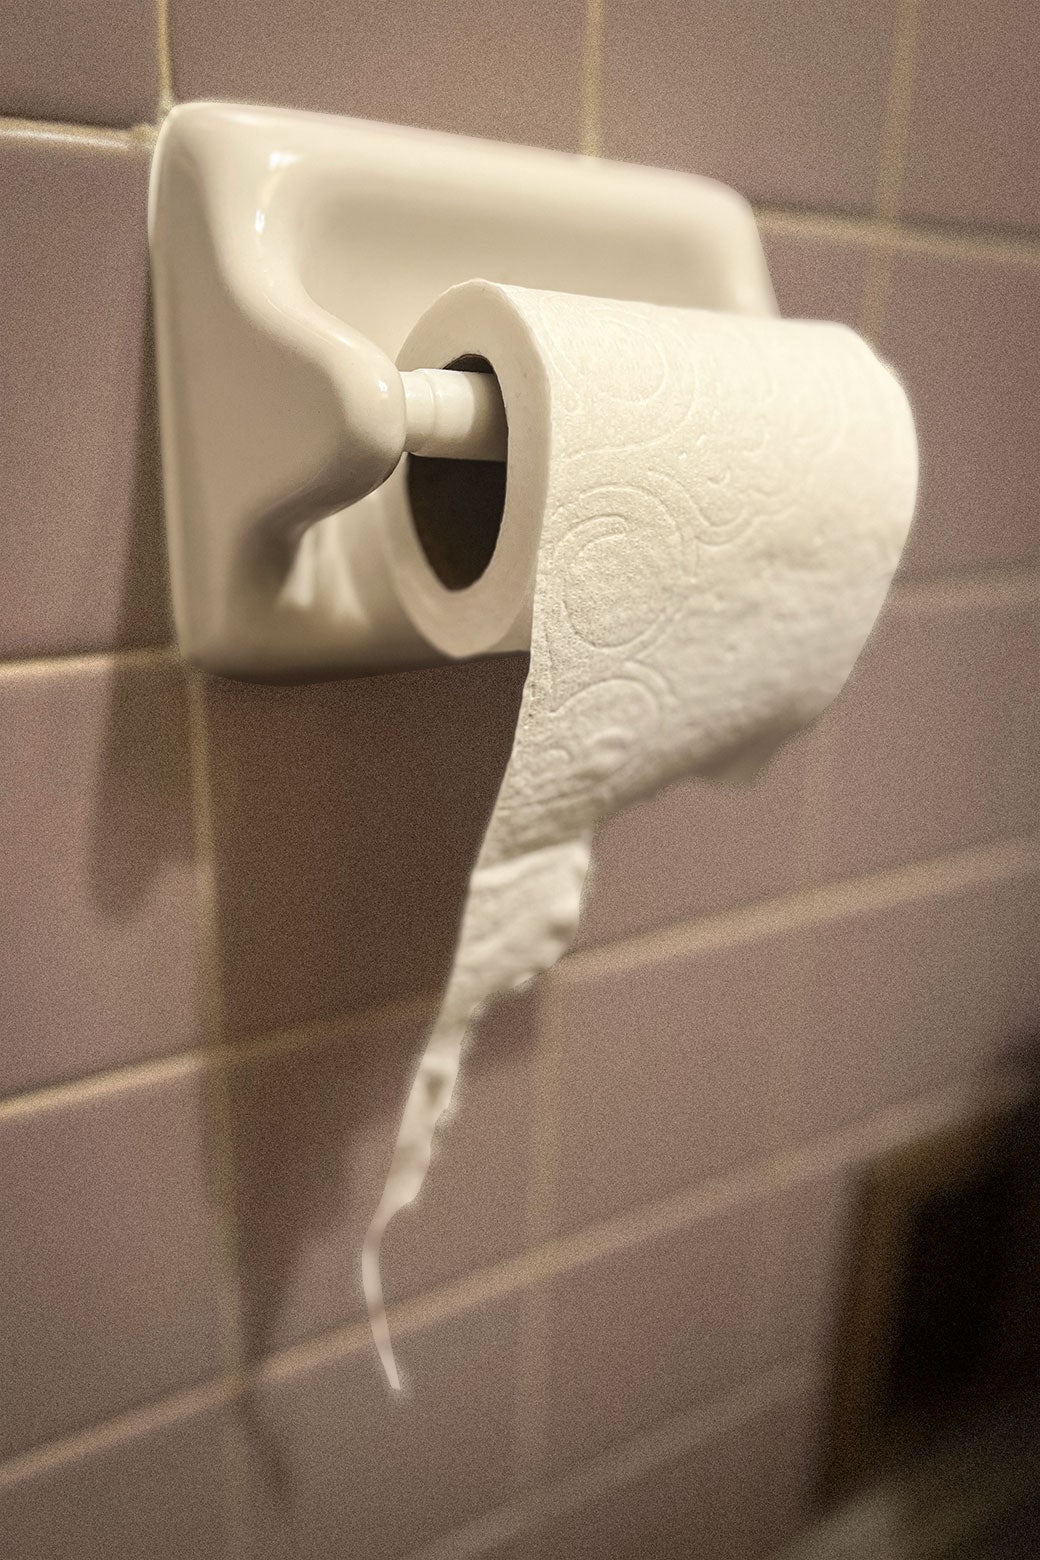 This is the strange reason why toilet paper is pink